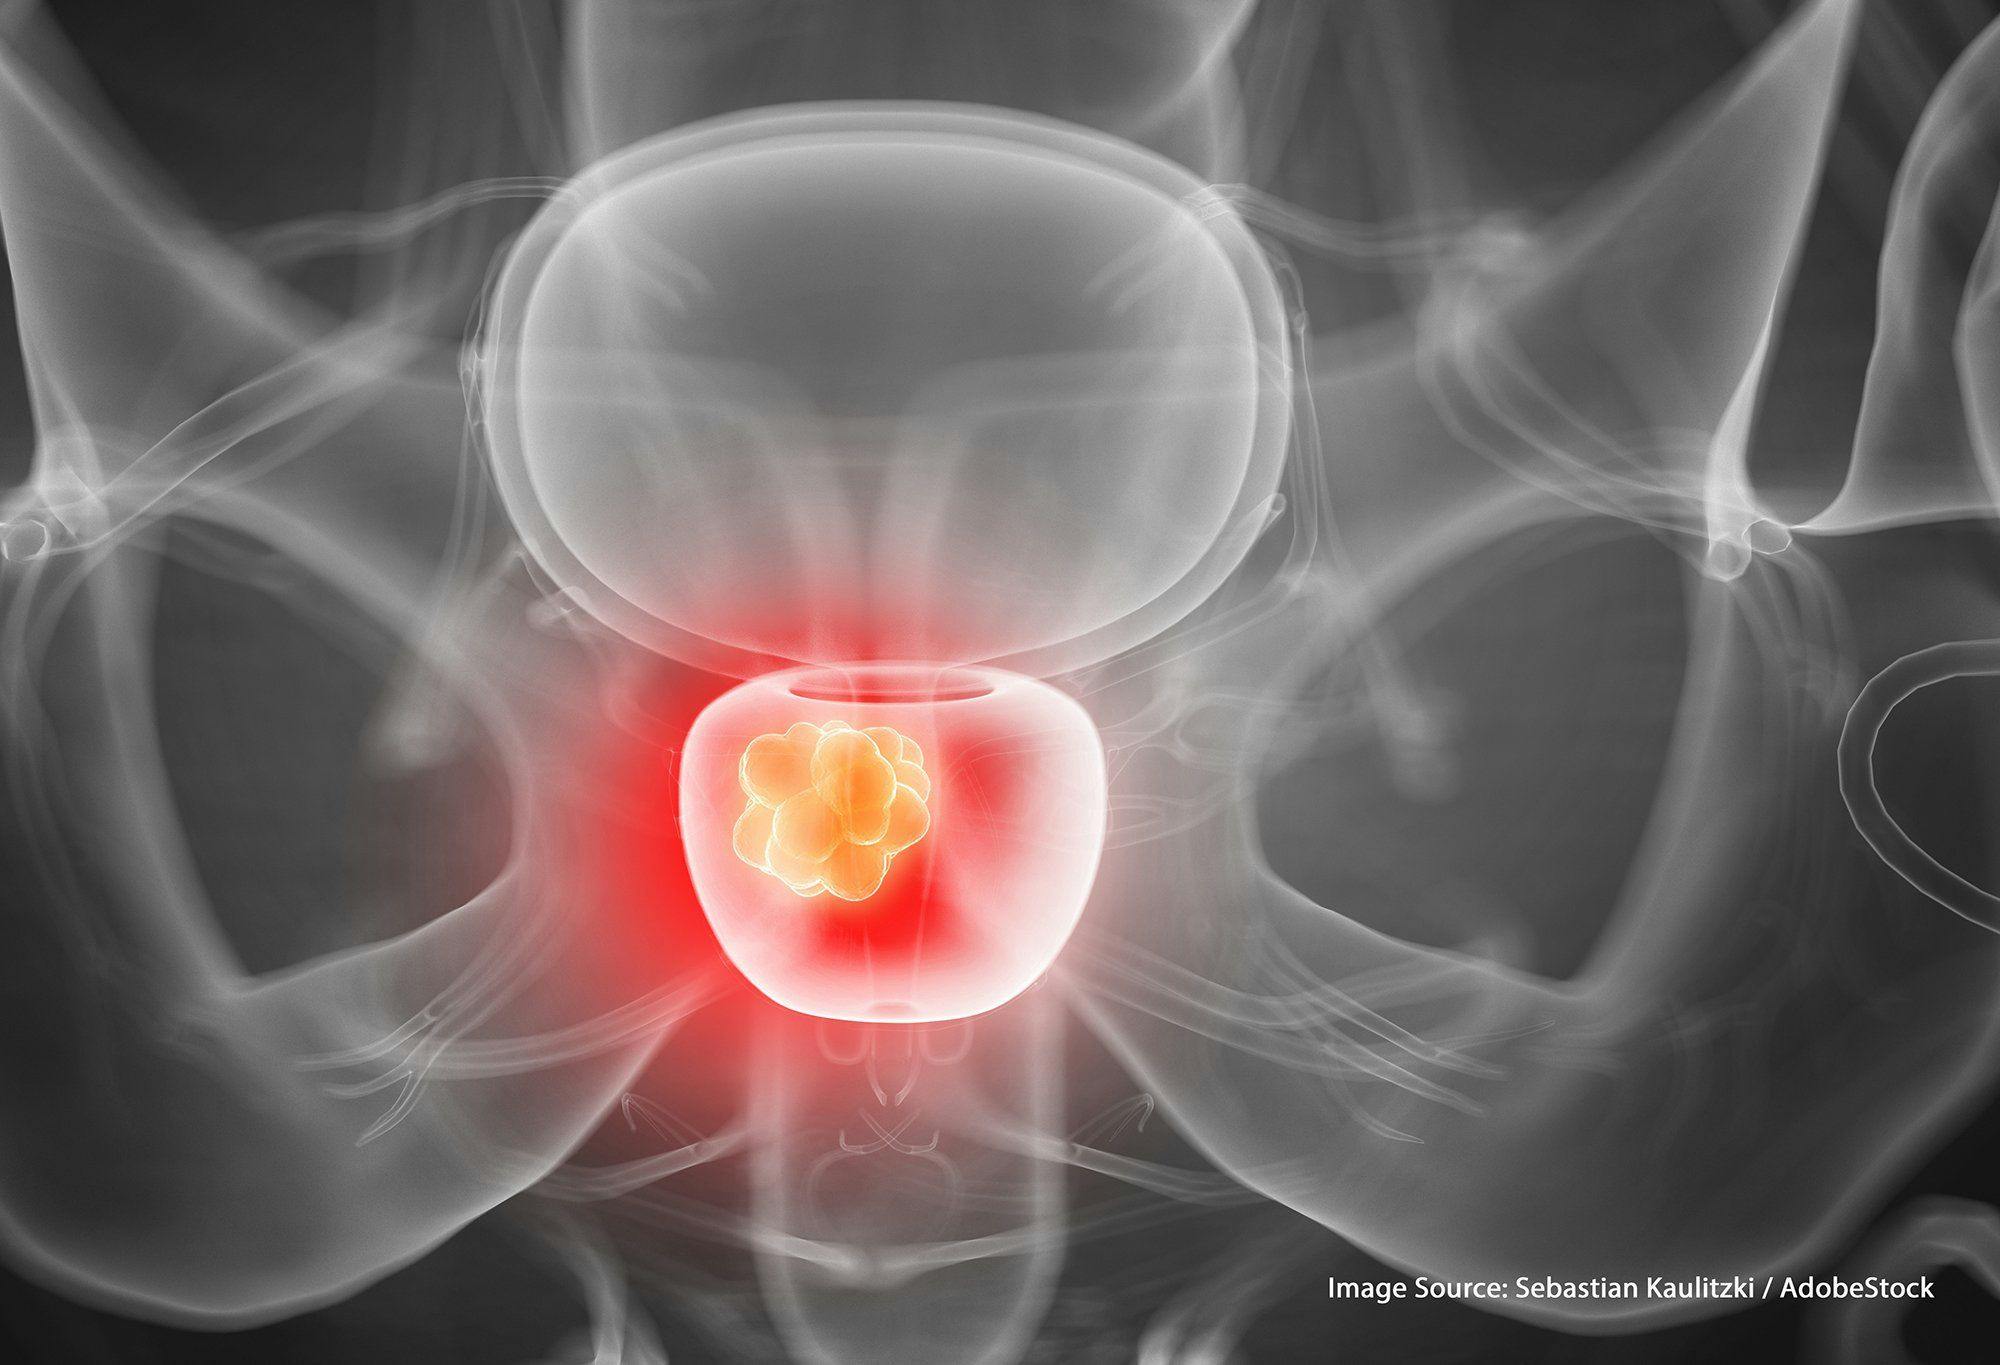 Counterpoint: Should Active Surveillance Be Used for Gleason 3+4 Prostate Cancer?